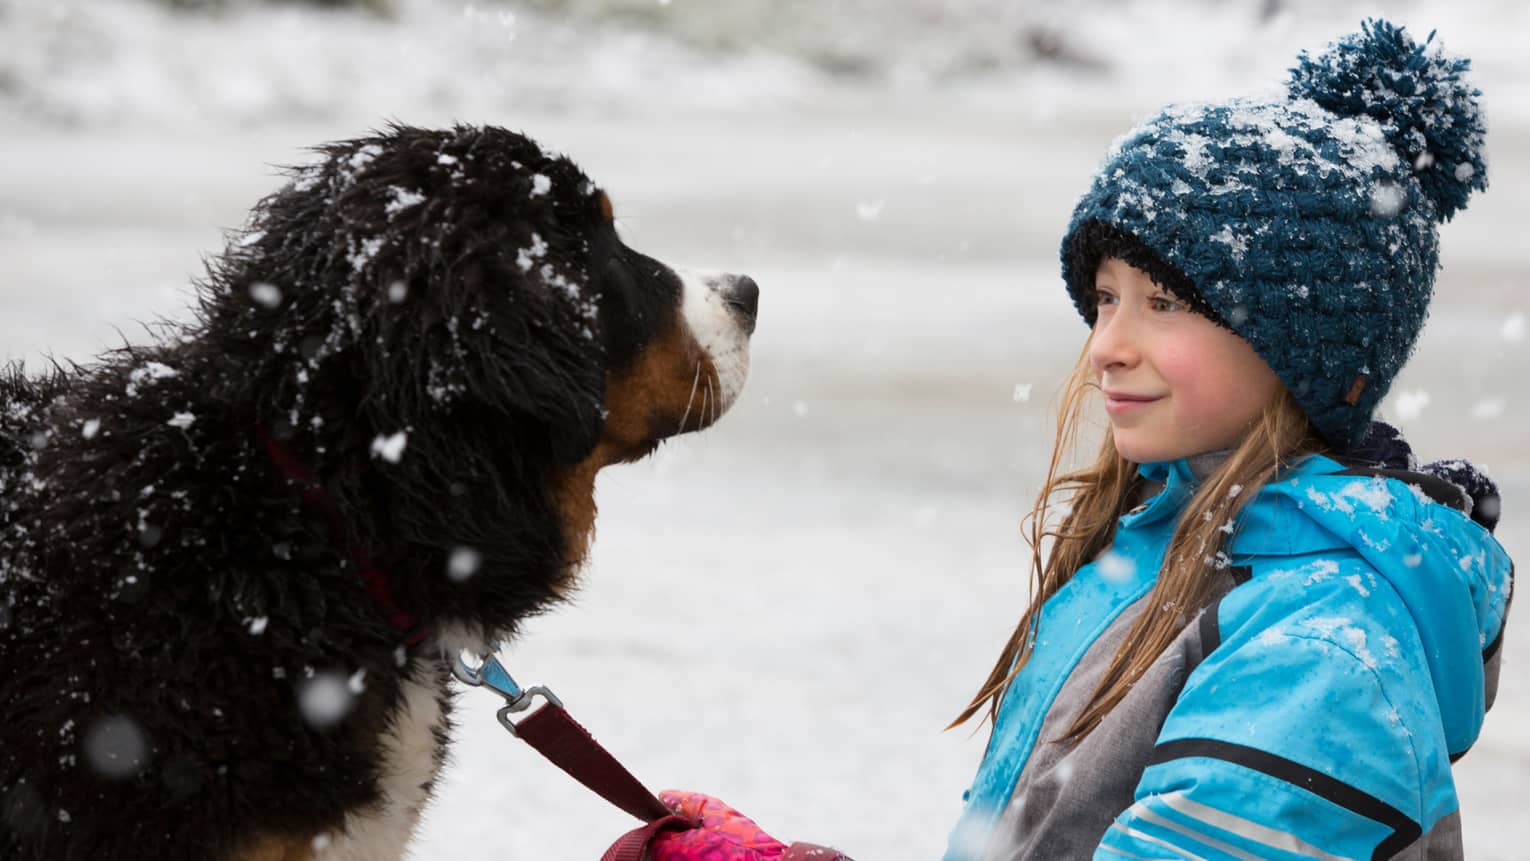 Young girl with knit hat holds leash of large dog as snow falls